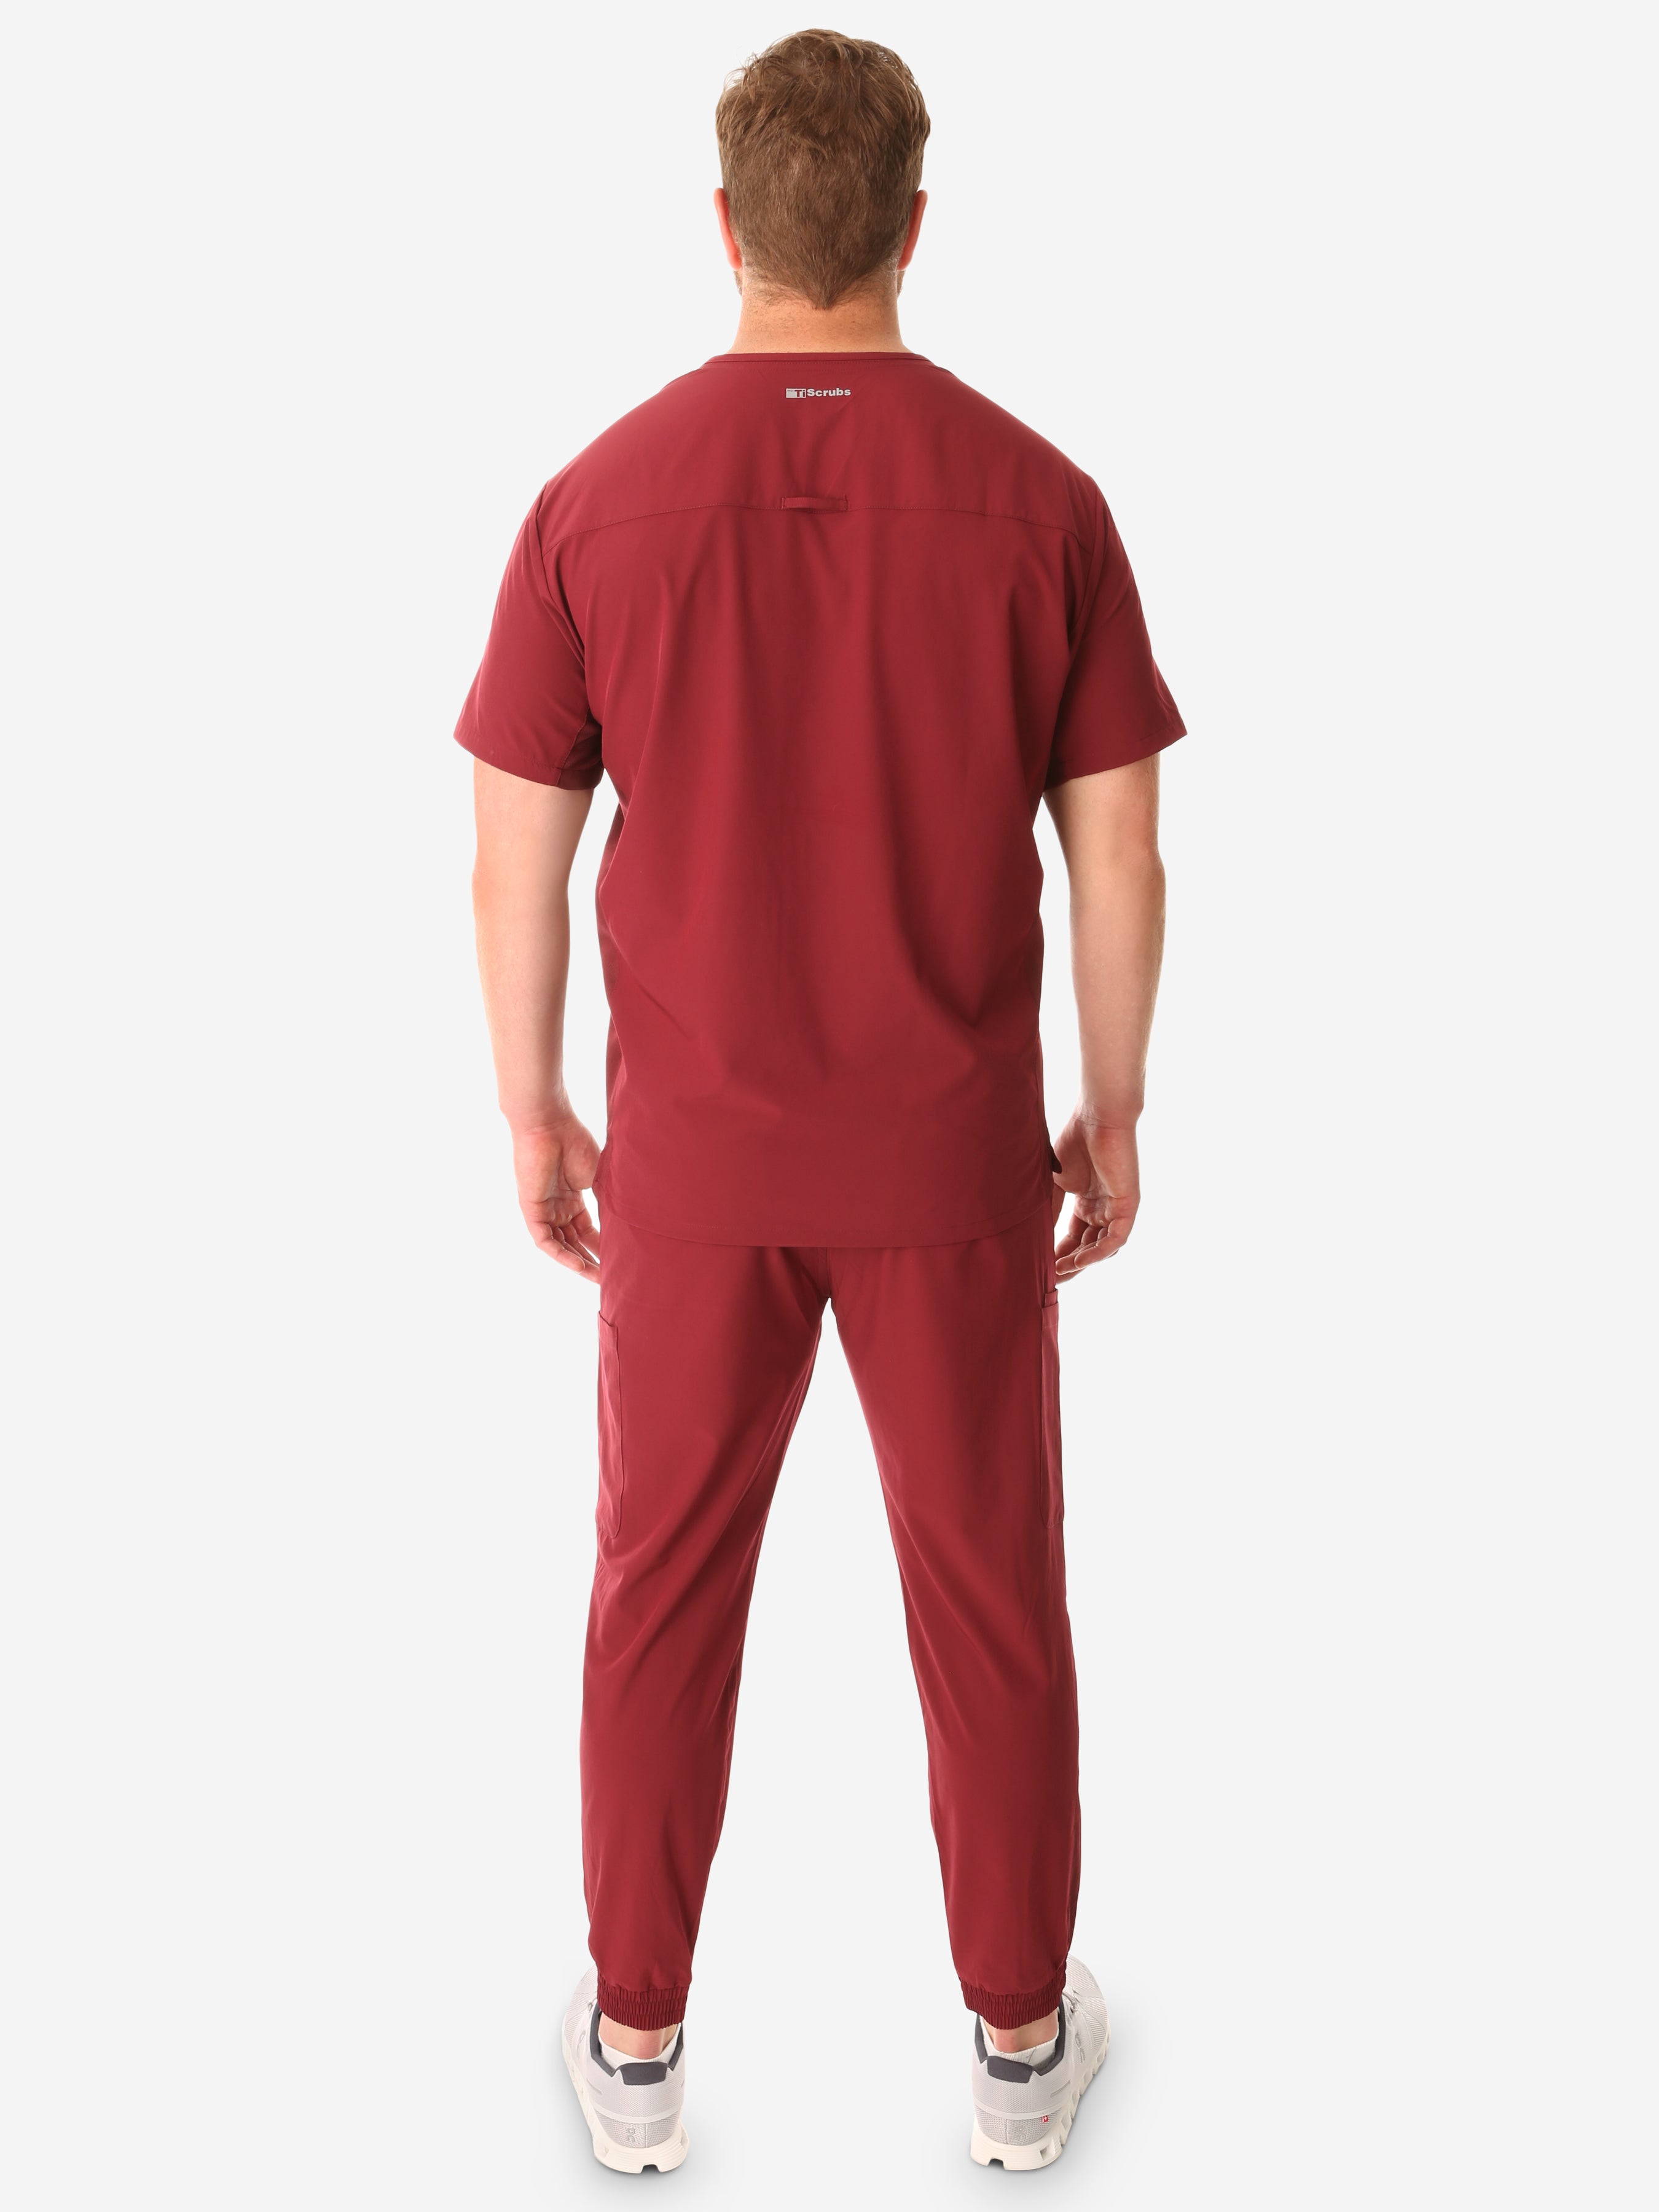 TiScrubs Men's Stretch Bold Burgundy Double-Pocket Scrub Top and Joggers with Long-Sleeve Full Body Back